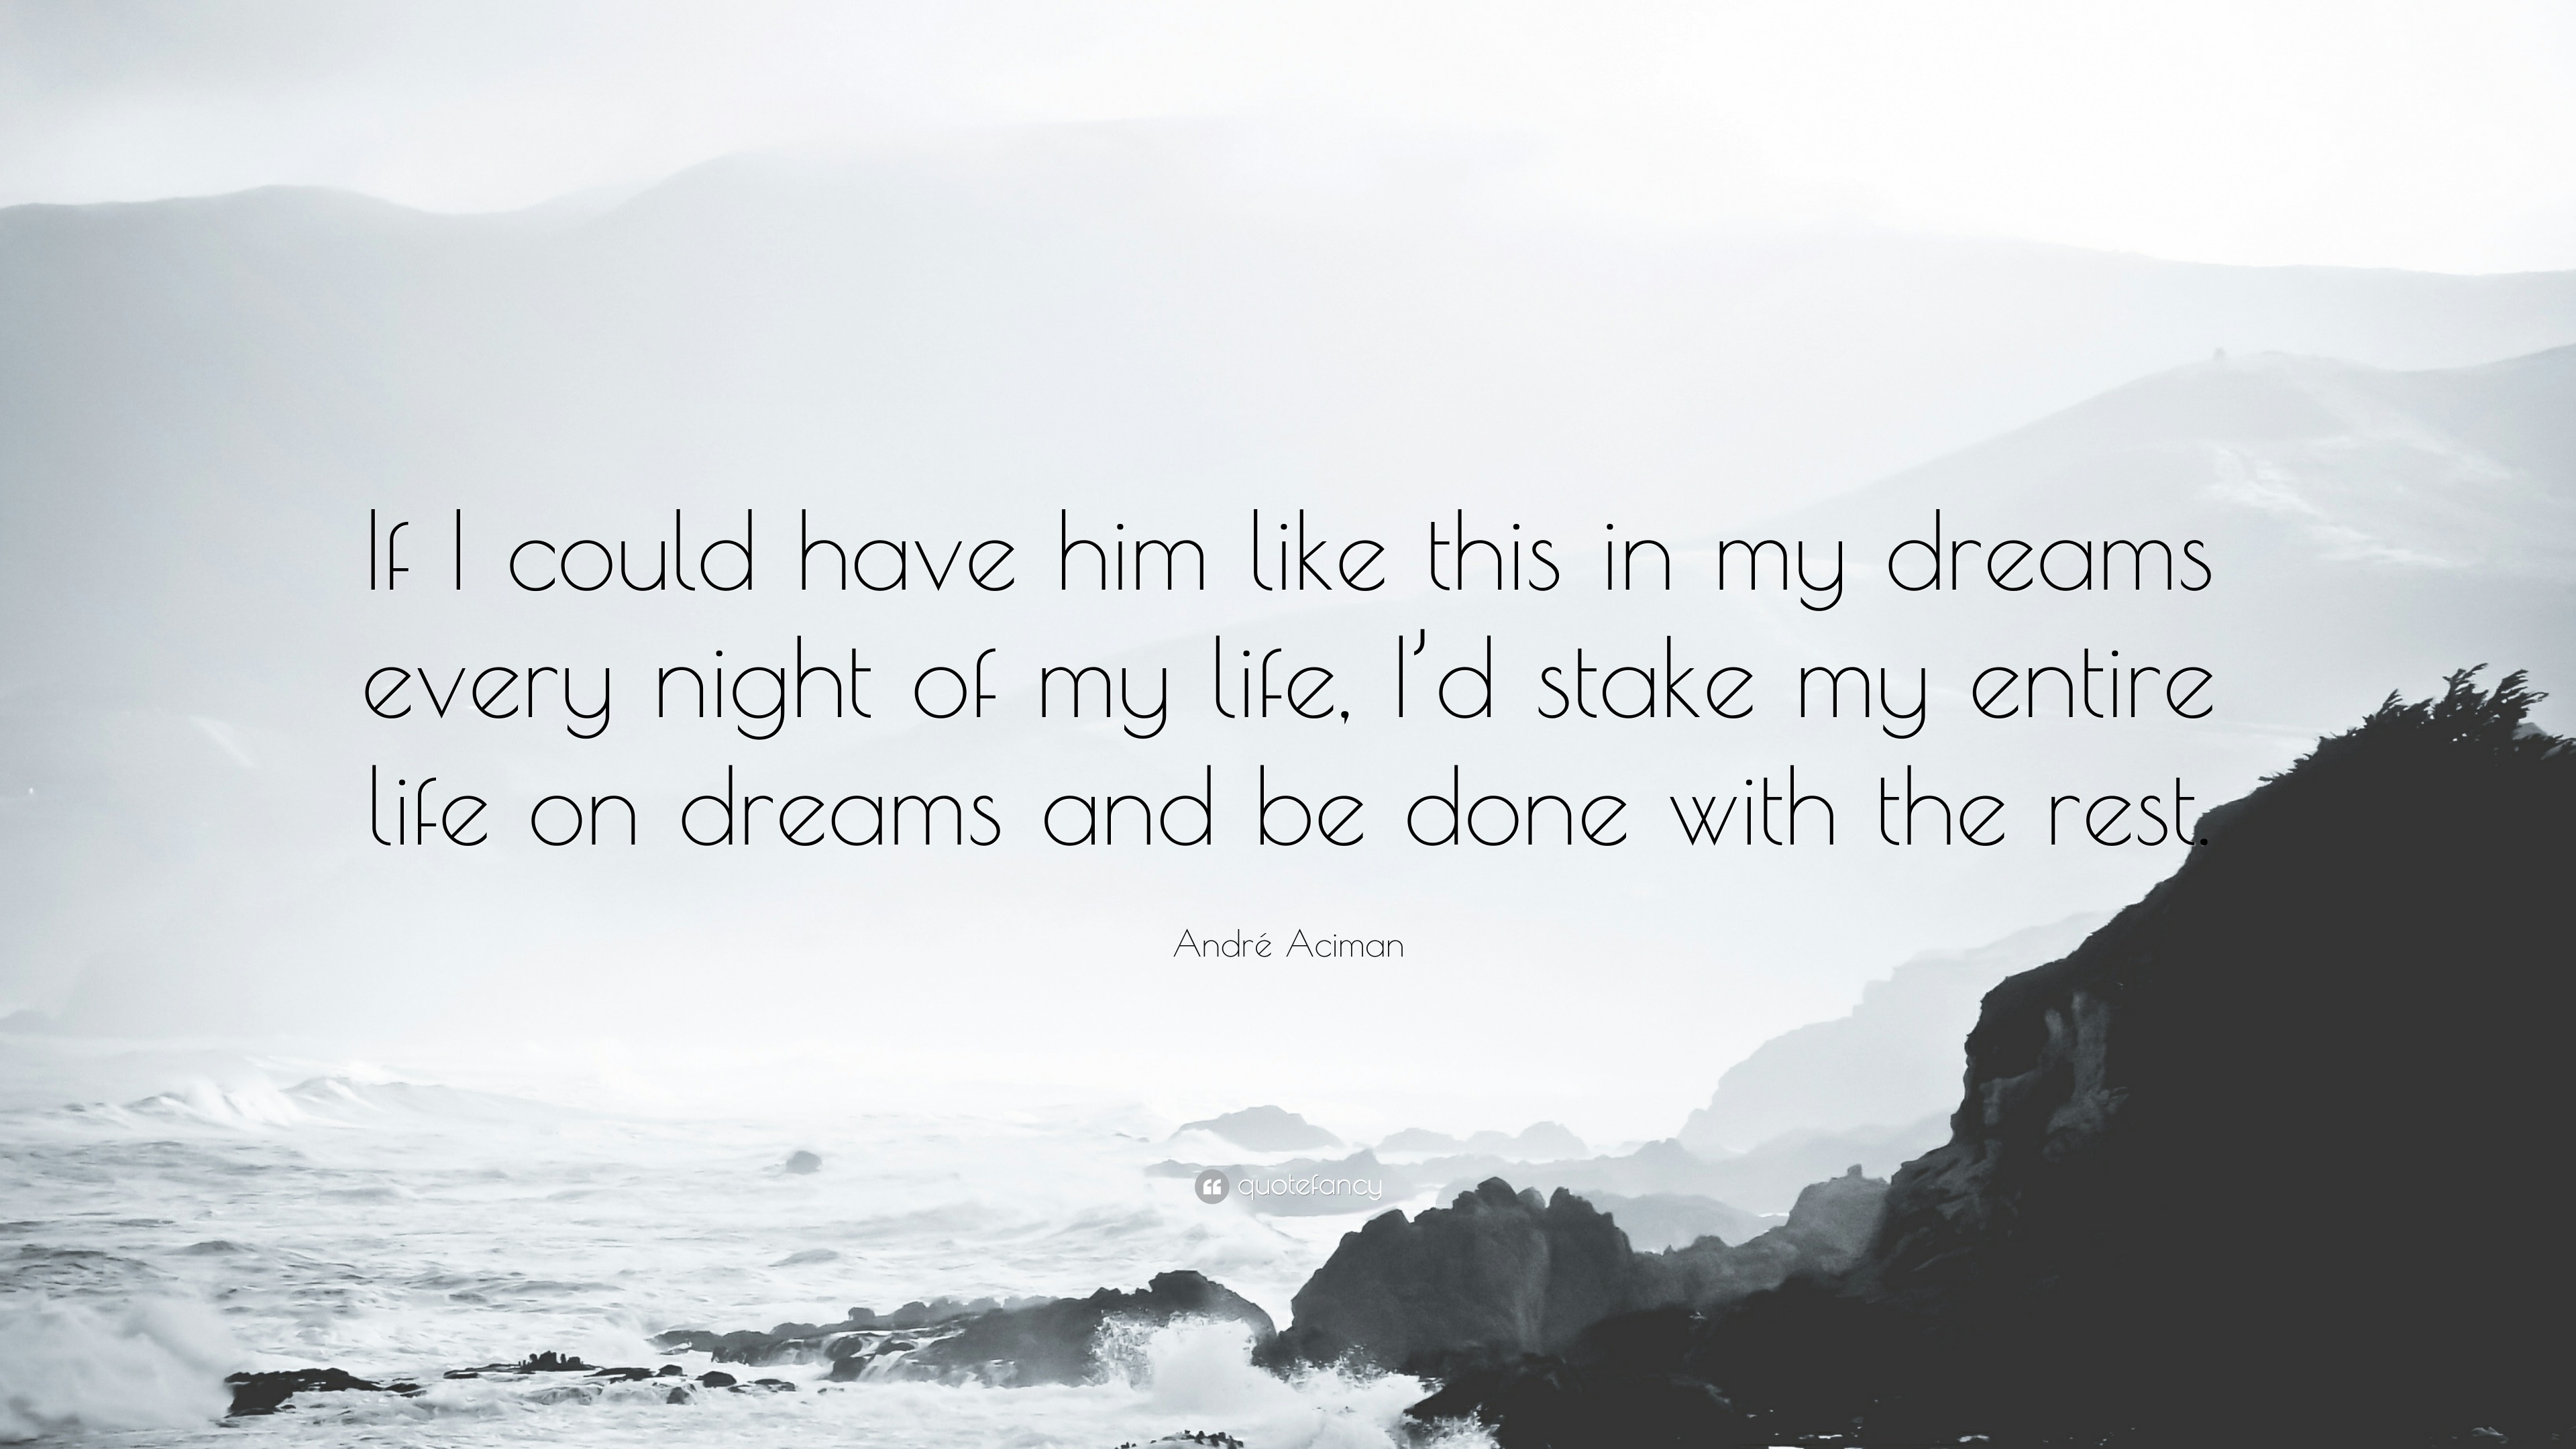 Andre Aciman Quote If I Could Have Him Like This In My Dreams Every Night Of My Life I D Stake My Entire Life On Dreams And Be Done With T 7 Wallpapers